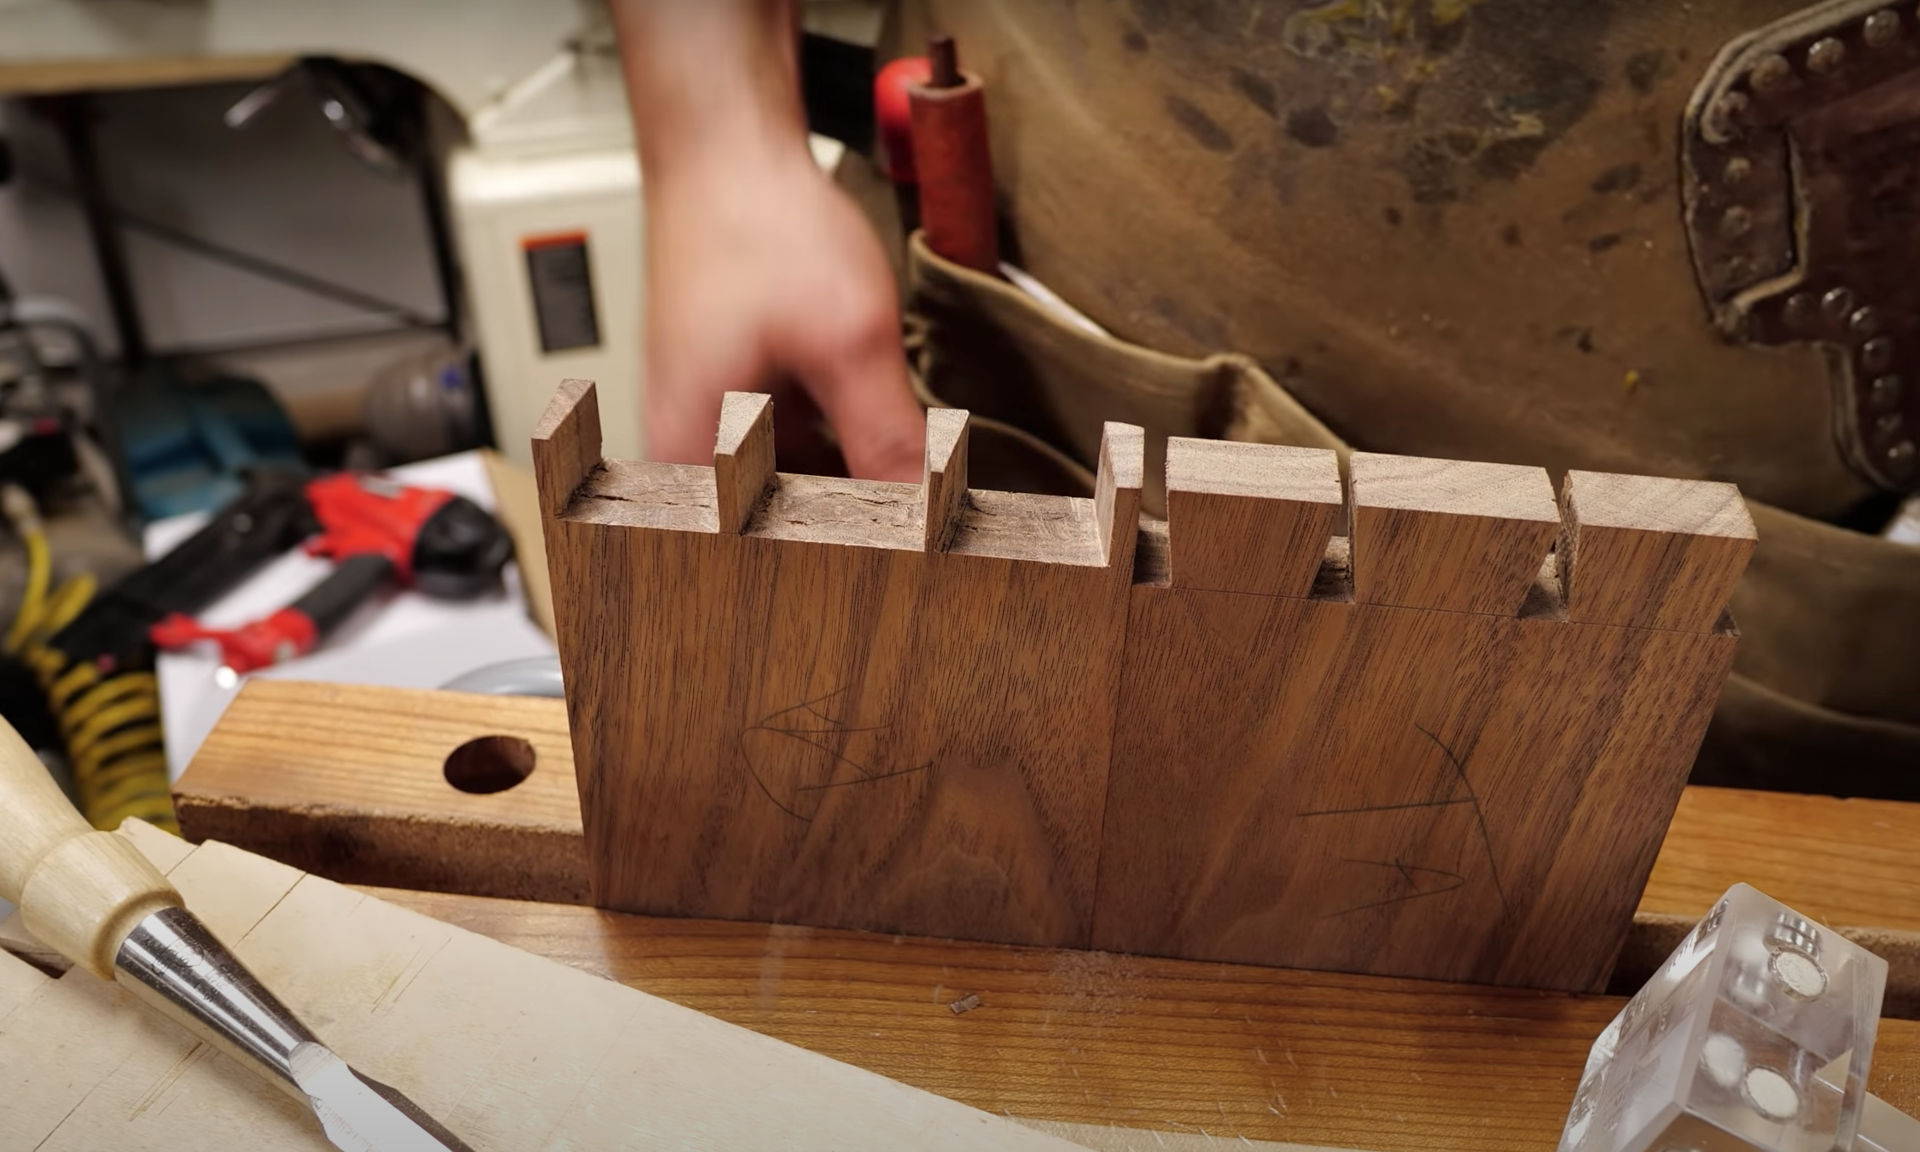 Hand Tool Tote with Hand Cut Dovetails